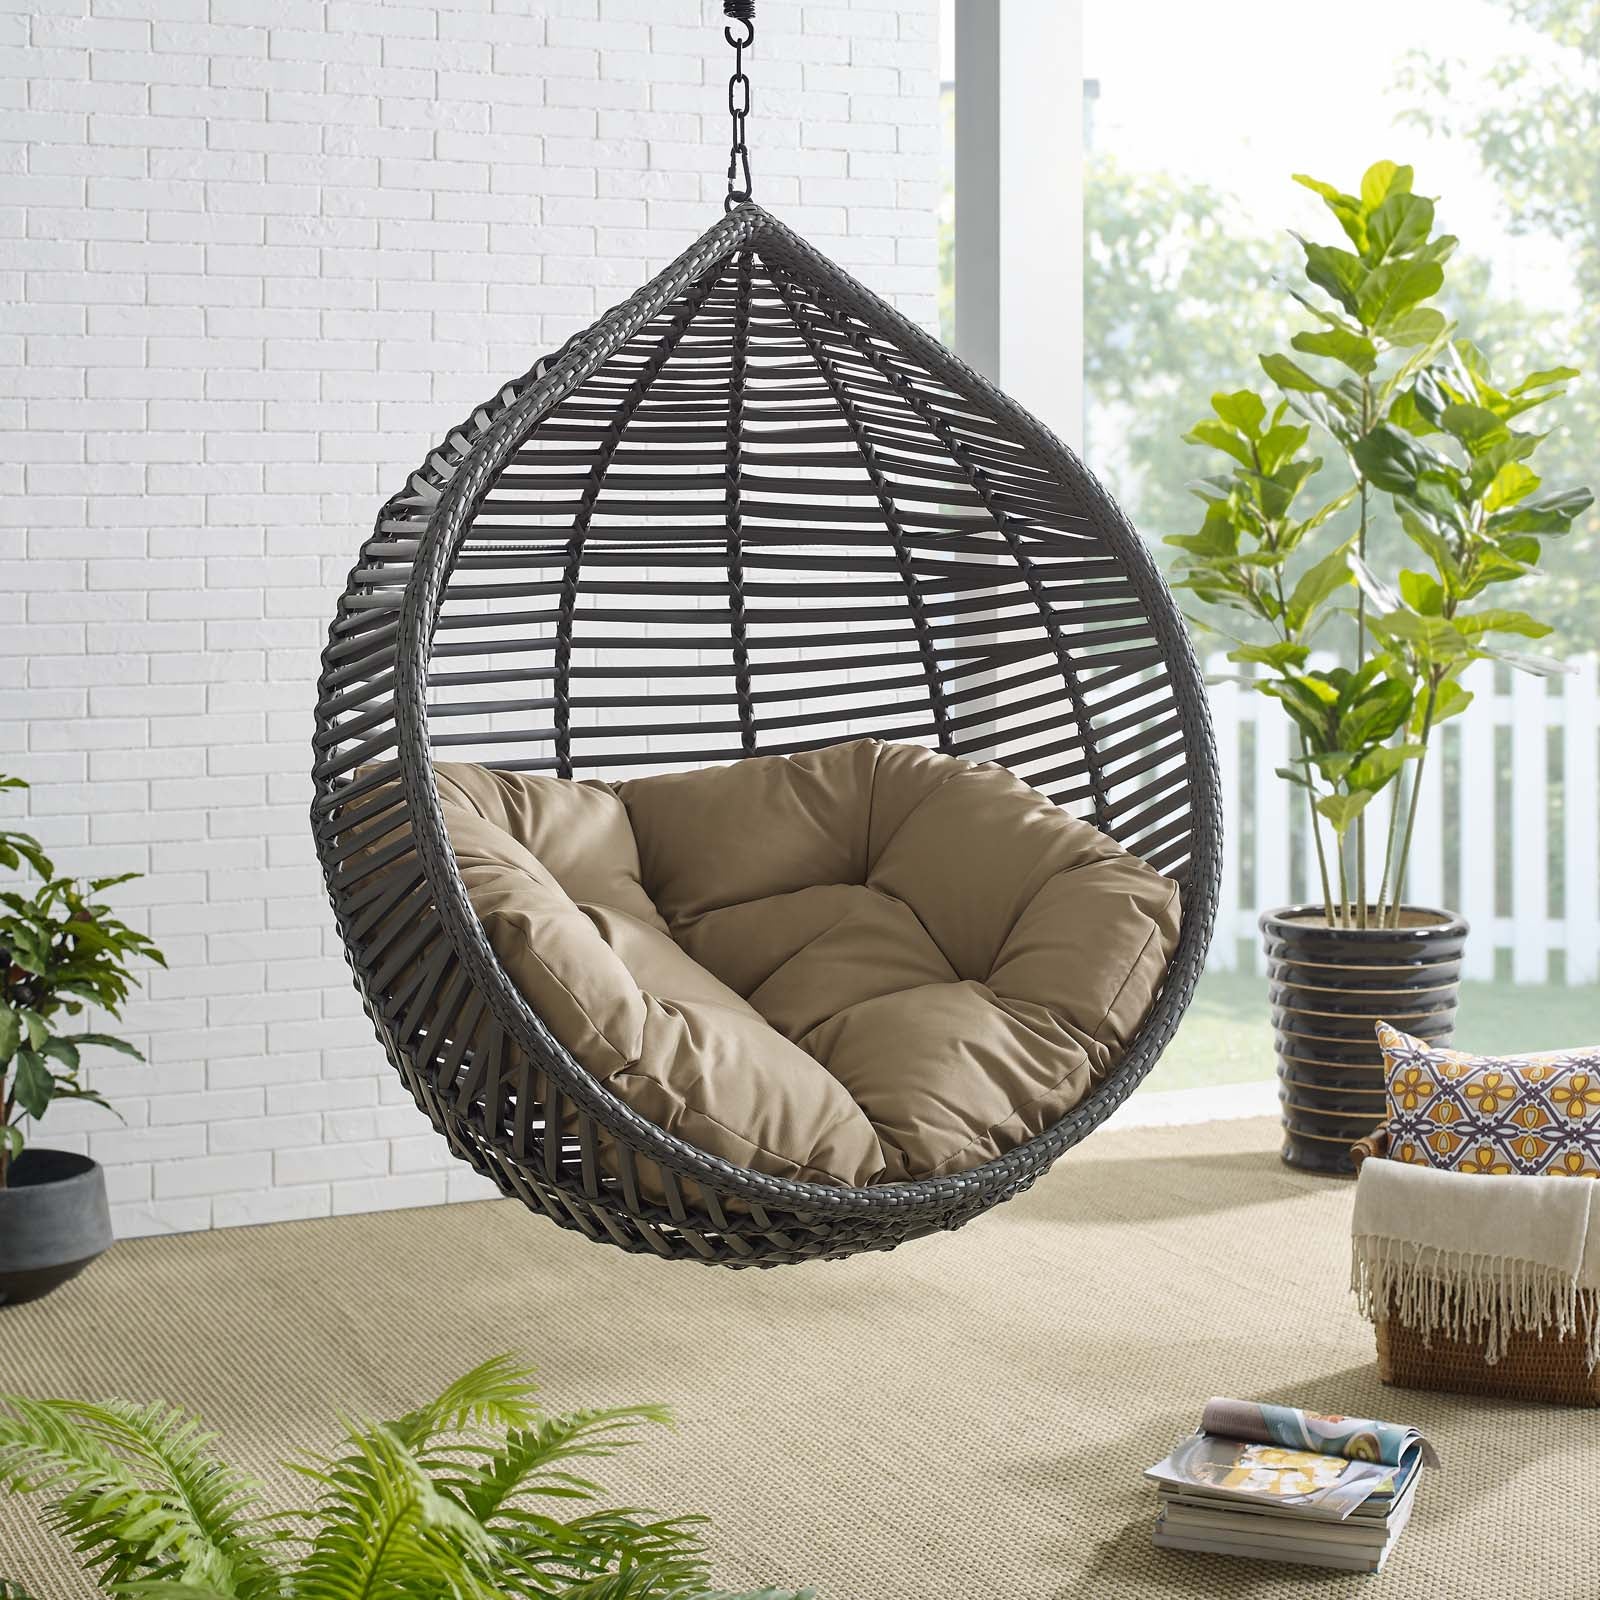 Modway - Garner Teardrop Outdoor Patio Swing Chair Without Stand - EEI-3637